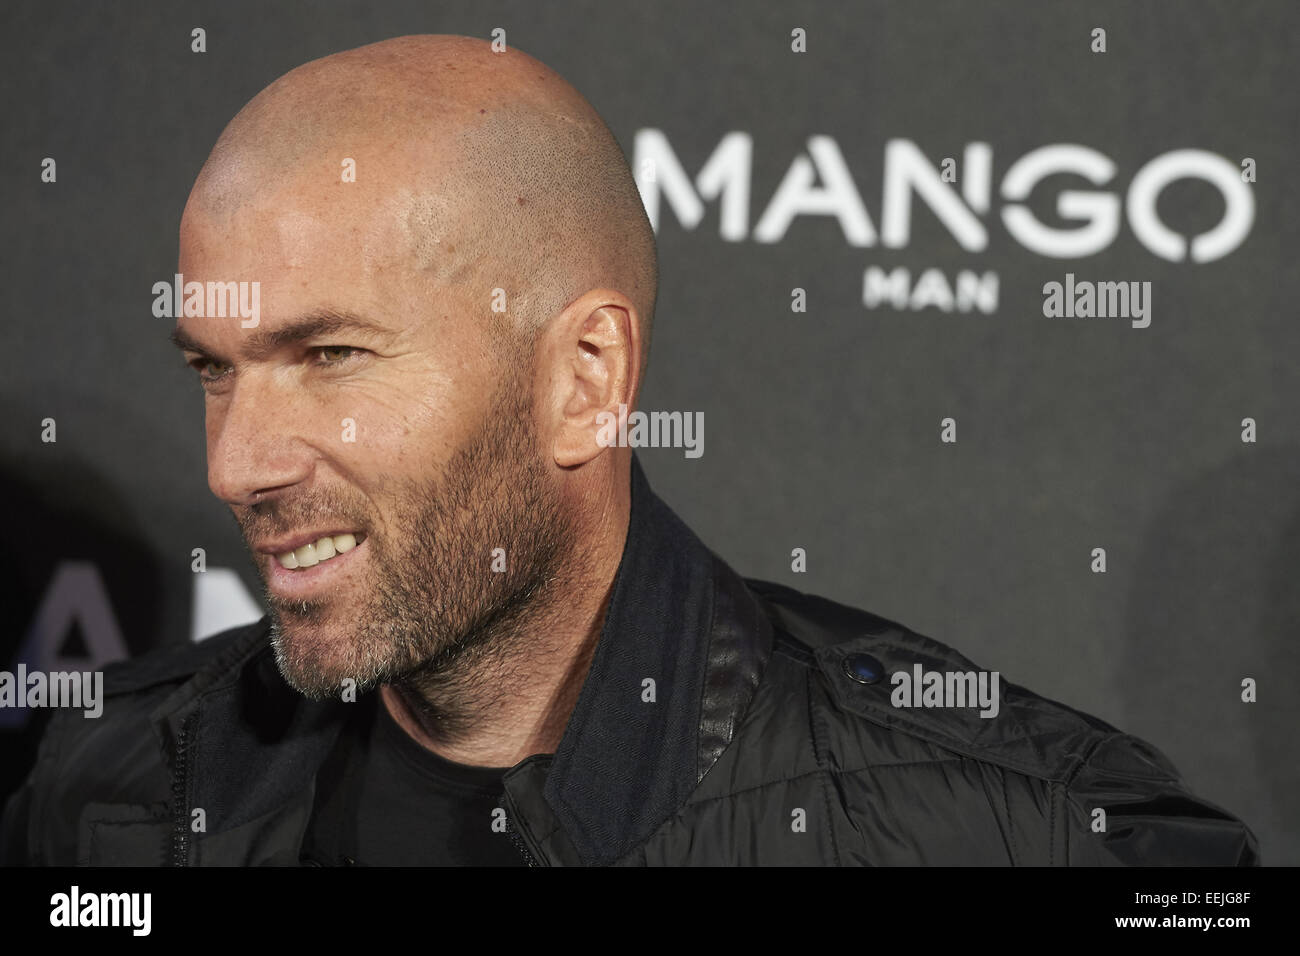 statistieken verf amateur Madrid, Spain. 19th Jan, 2015. Zinedine Zidane presented as New Mango Man  image for the 2015 collection at Camera Studio on January 19, 2015 in  Madrid Credit: Jack Abuin/ZUMA Wire/Alamy Live News